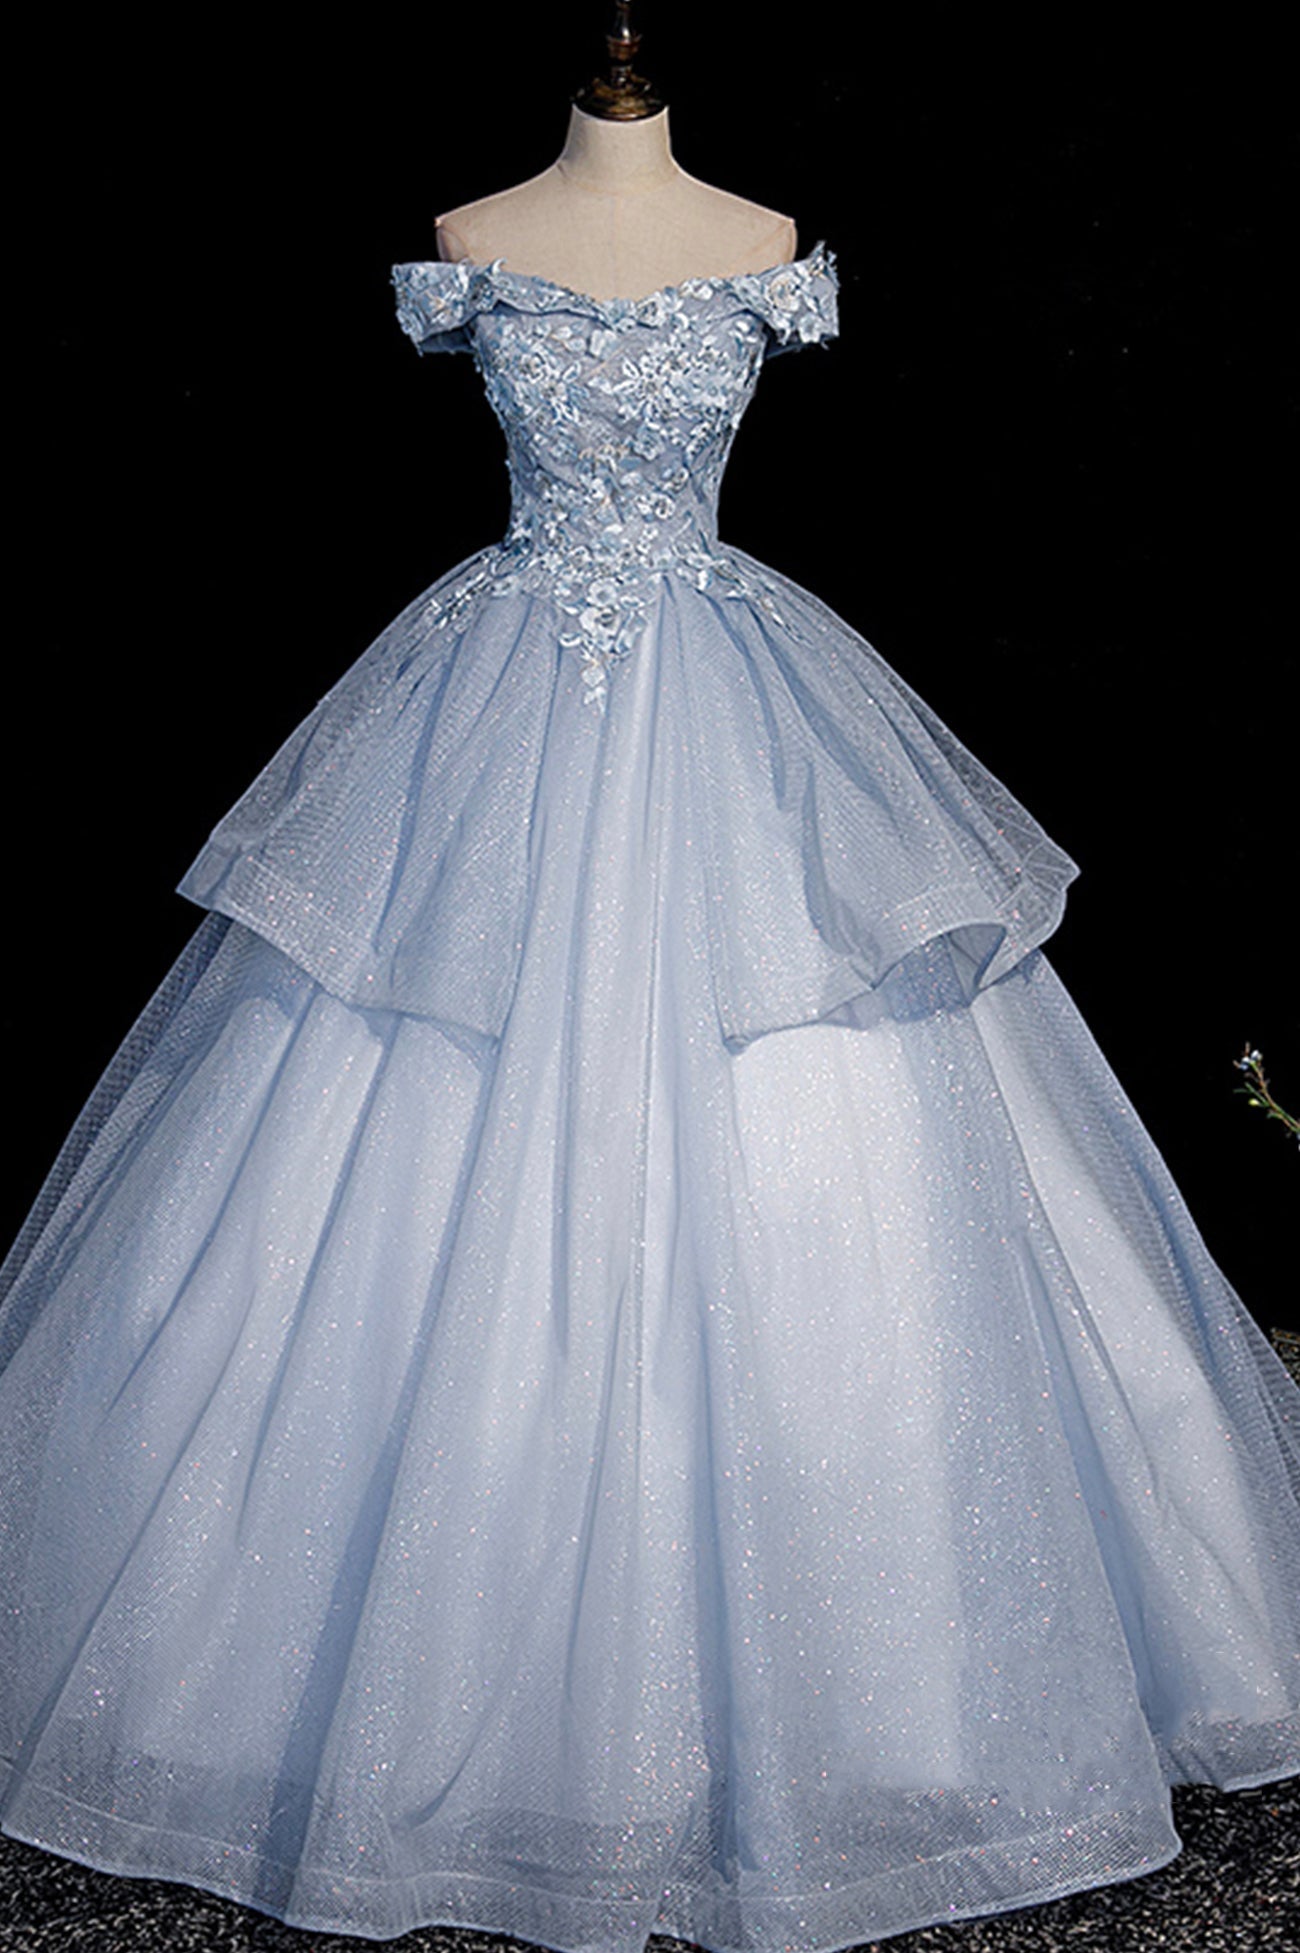 Ball Gown Blue Tulle Lace Long Party Dress Outfits For Girls, Off the Shoulder Evening Dress